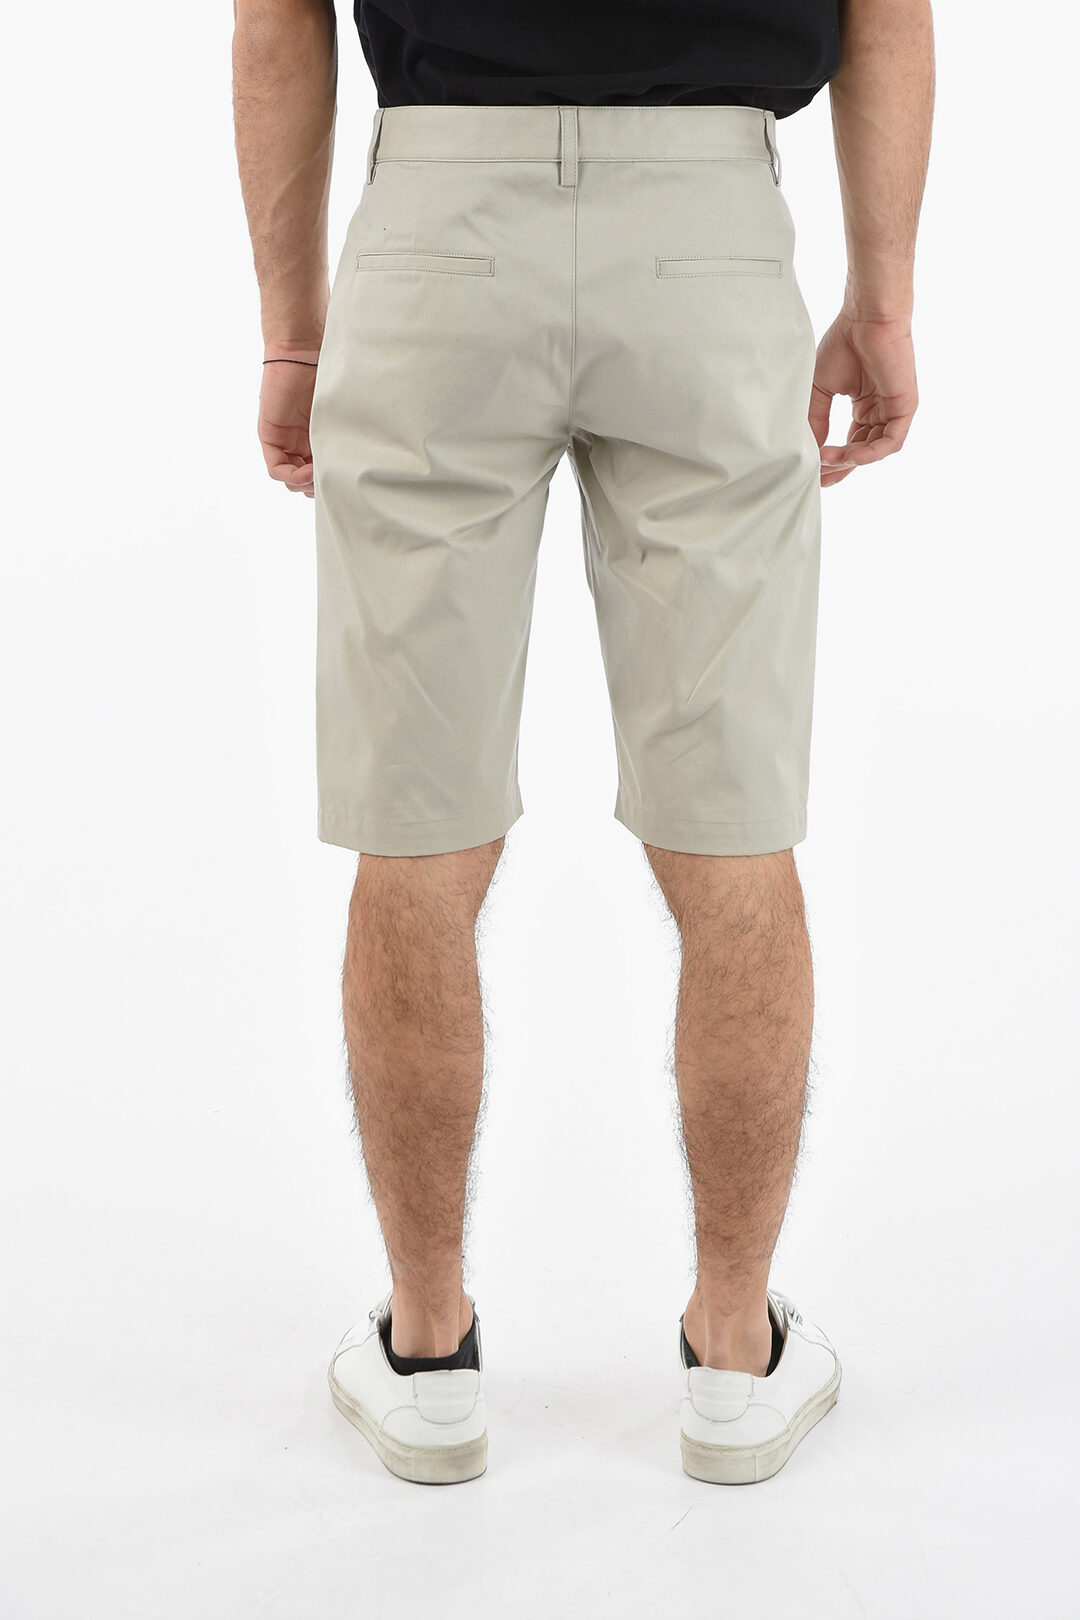 Off-White Cotton Blend INDUSTRIAL BELT Chino Shorts men - Glamood Outlet